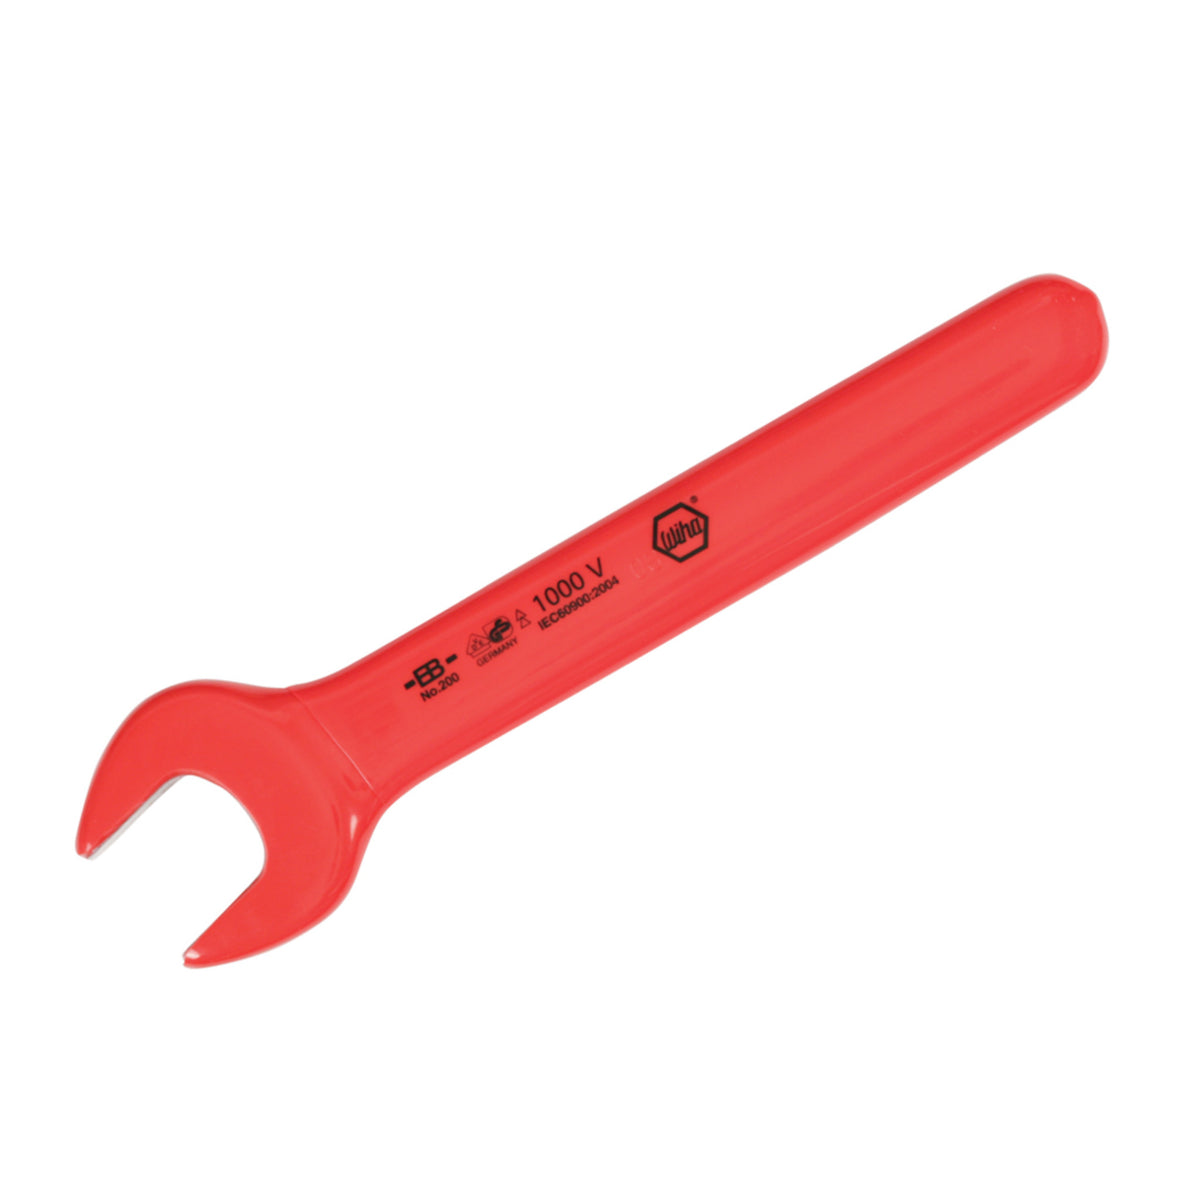 Wiha 20136 Insulated Open End Wrench 7/16"